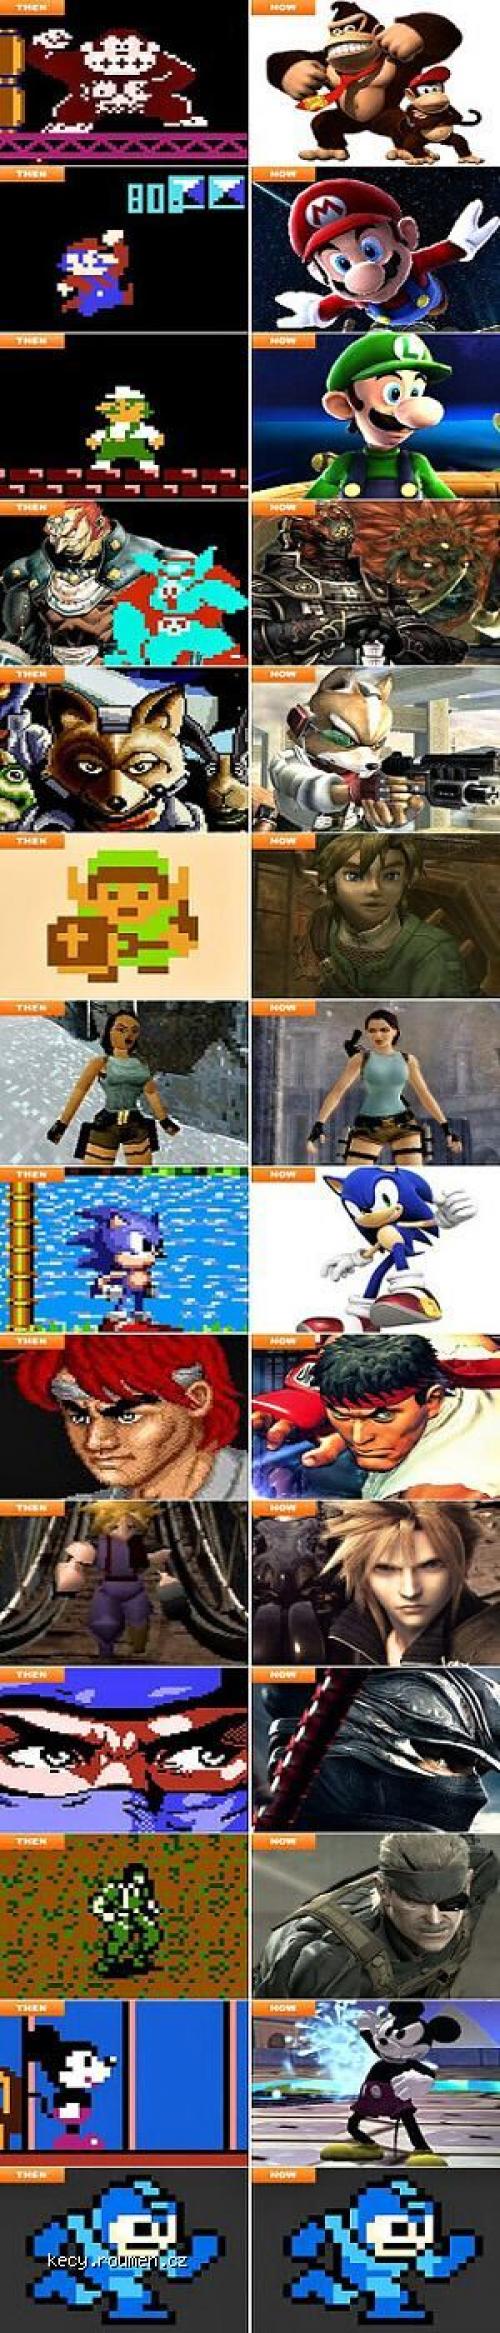 Videogame characters then and now